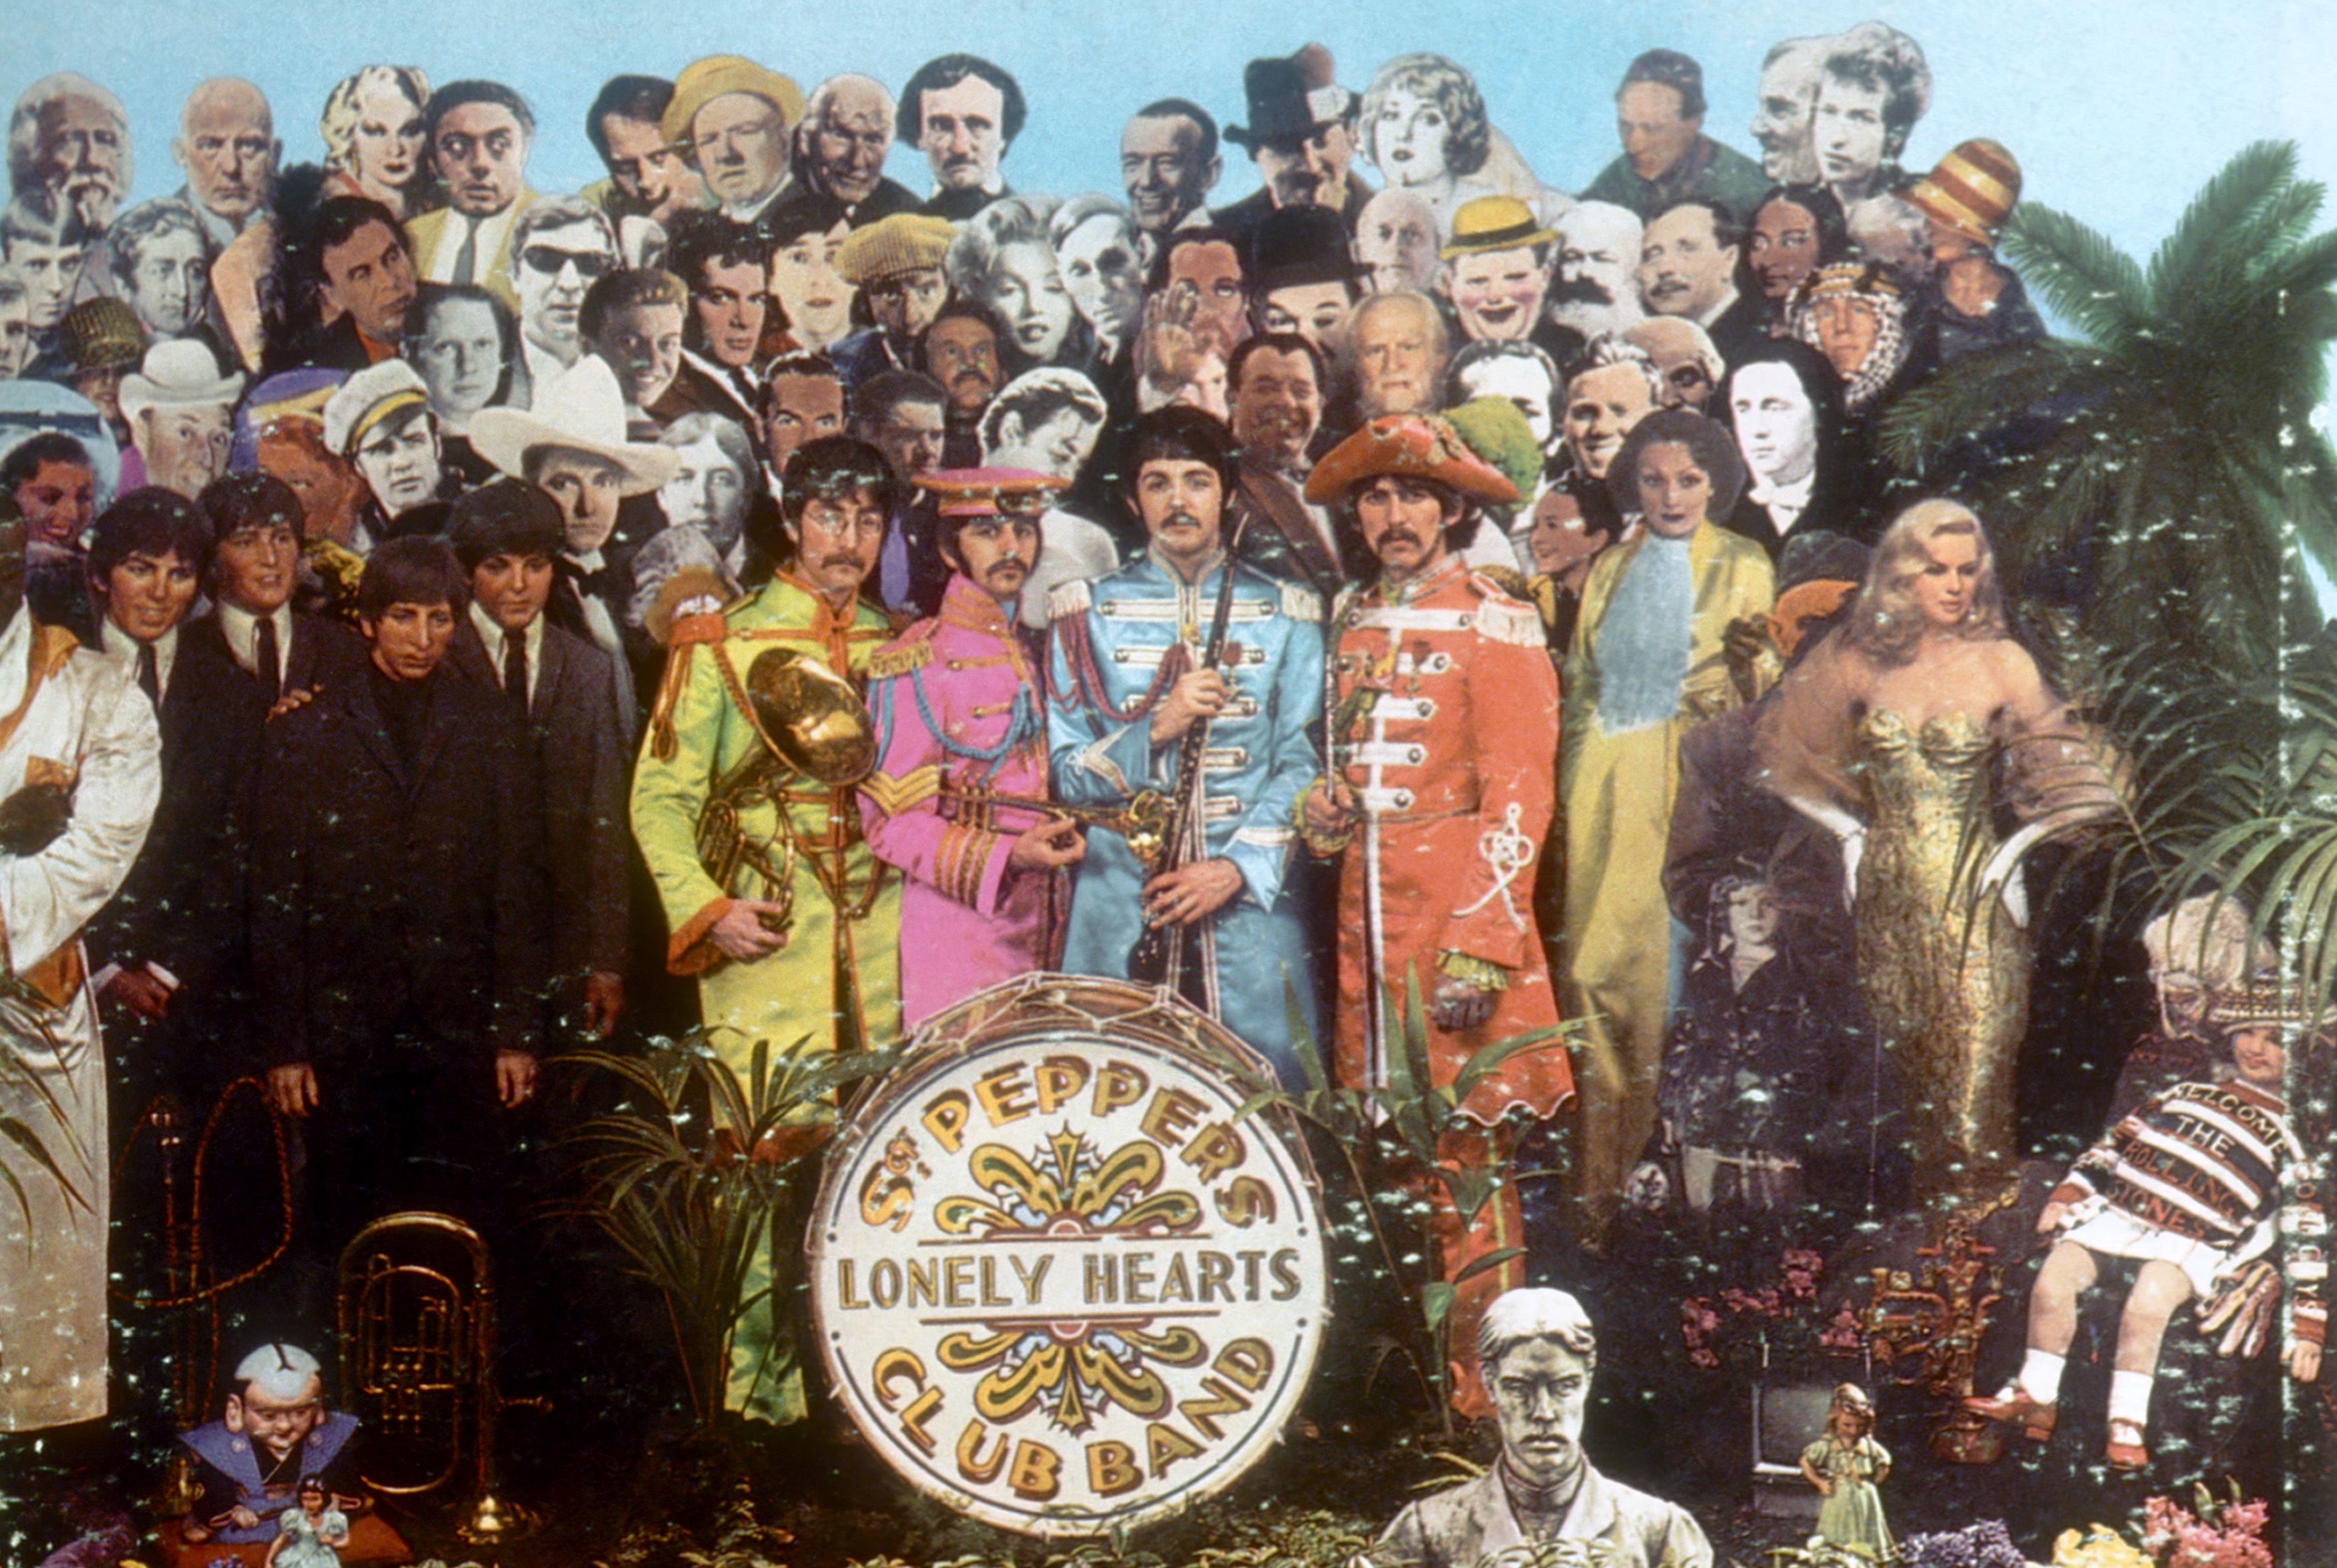 Beatles, the Irish aristocrat and the psychedelic sports car